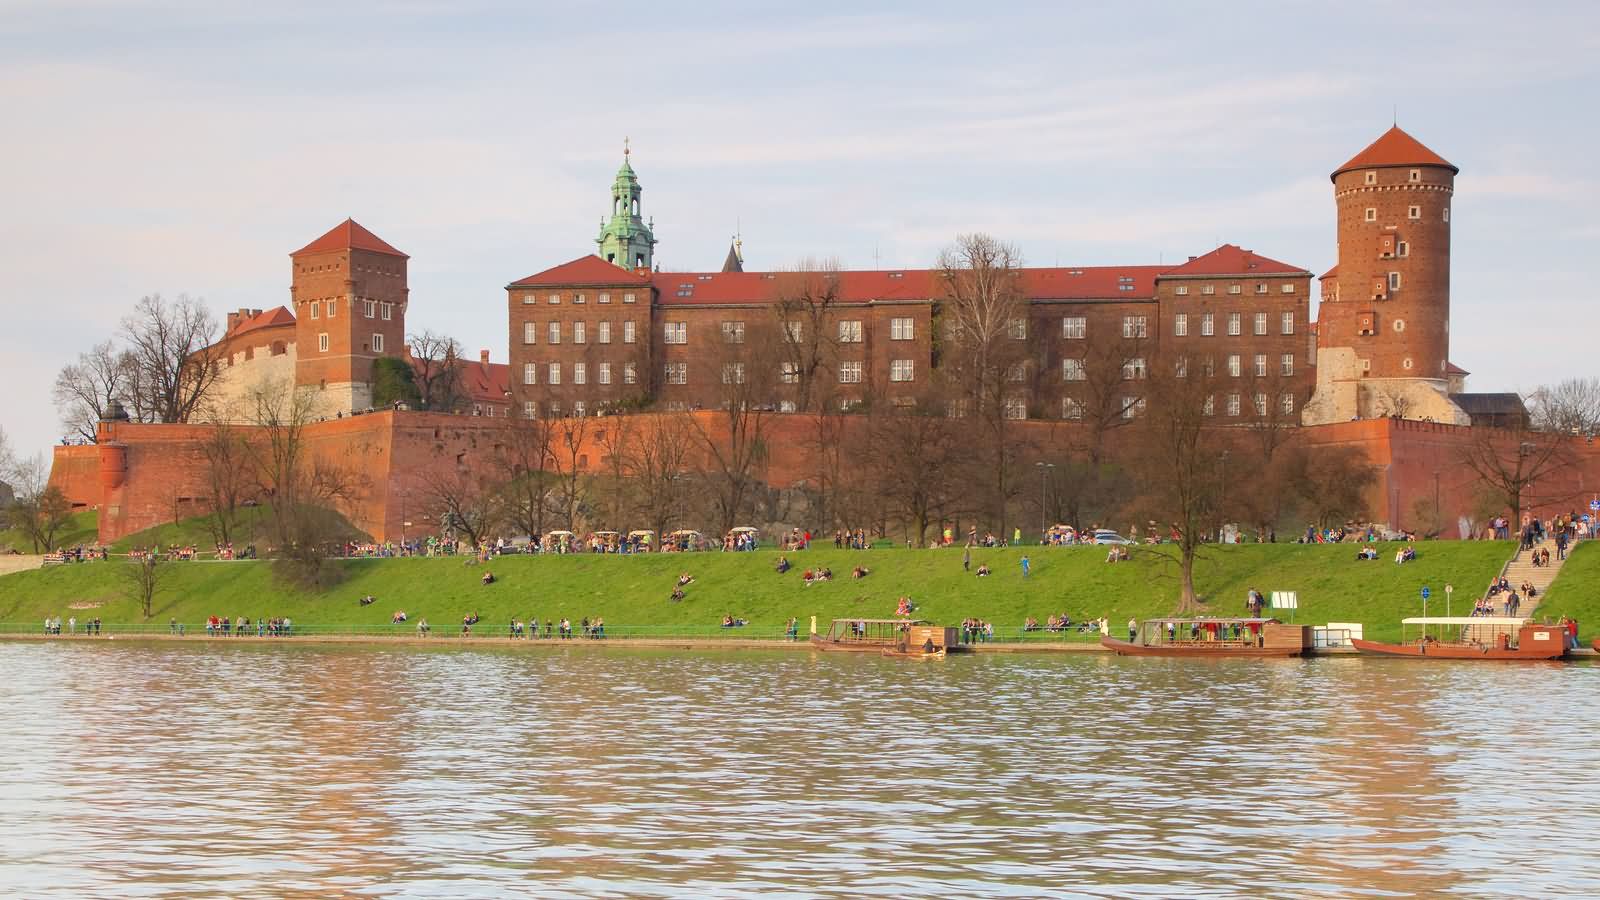 Wawel Royal Castle And River View